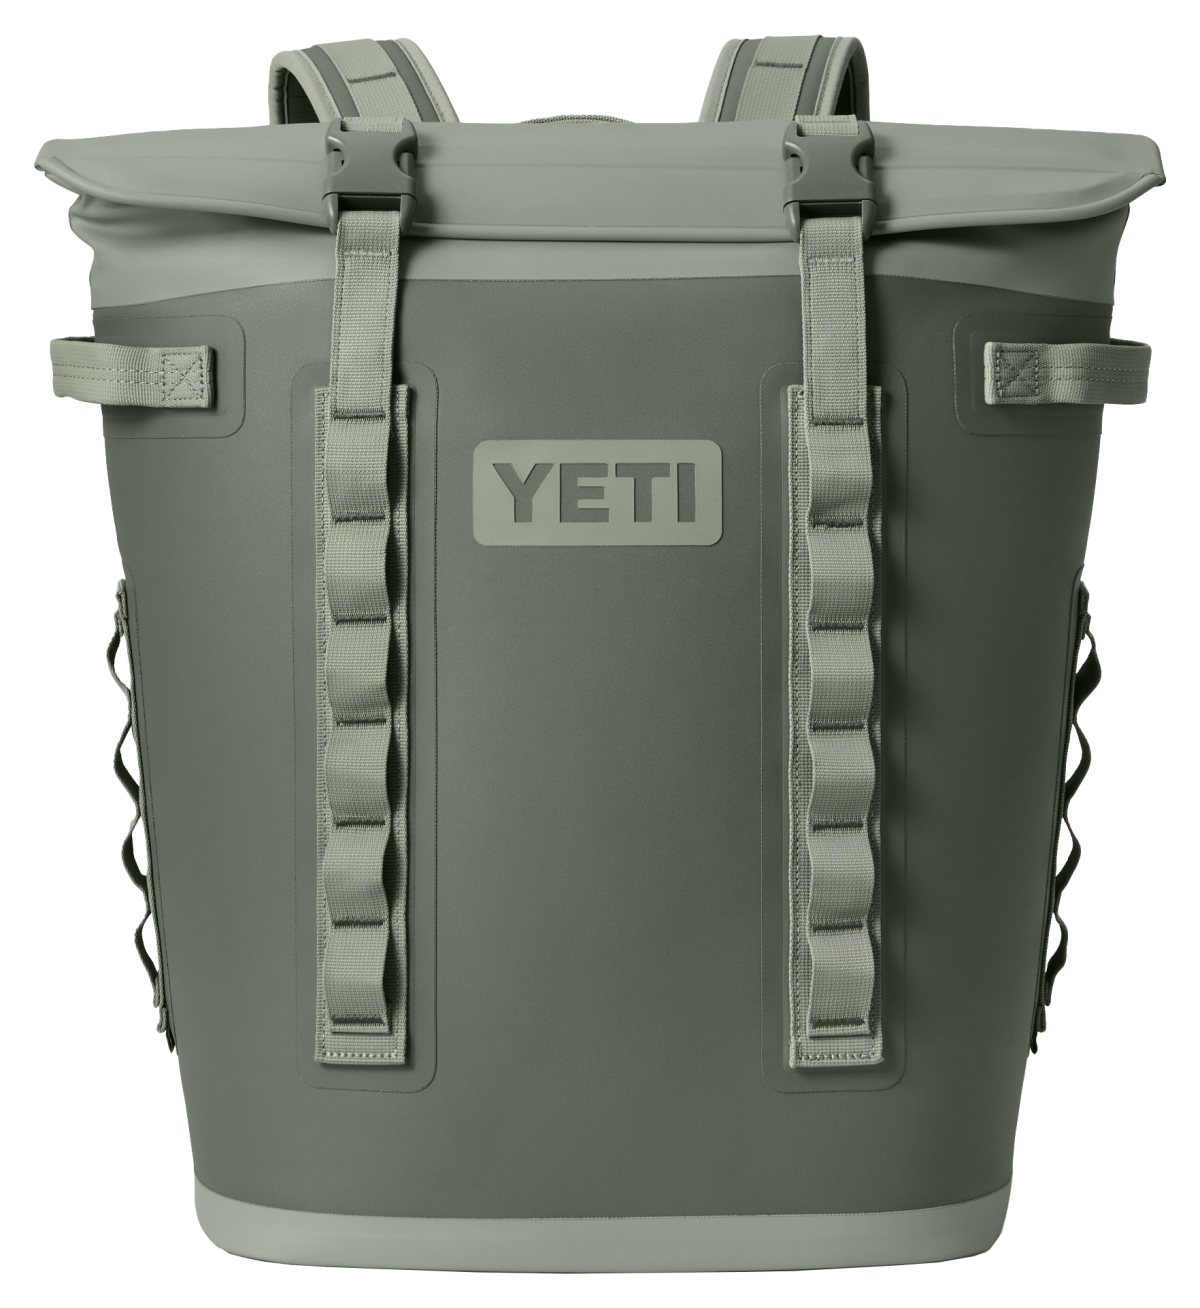 YETI Hopper M20 Backpack Cooler - Camp Green - 36 Cans